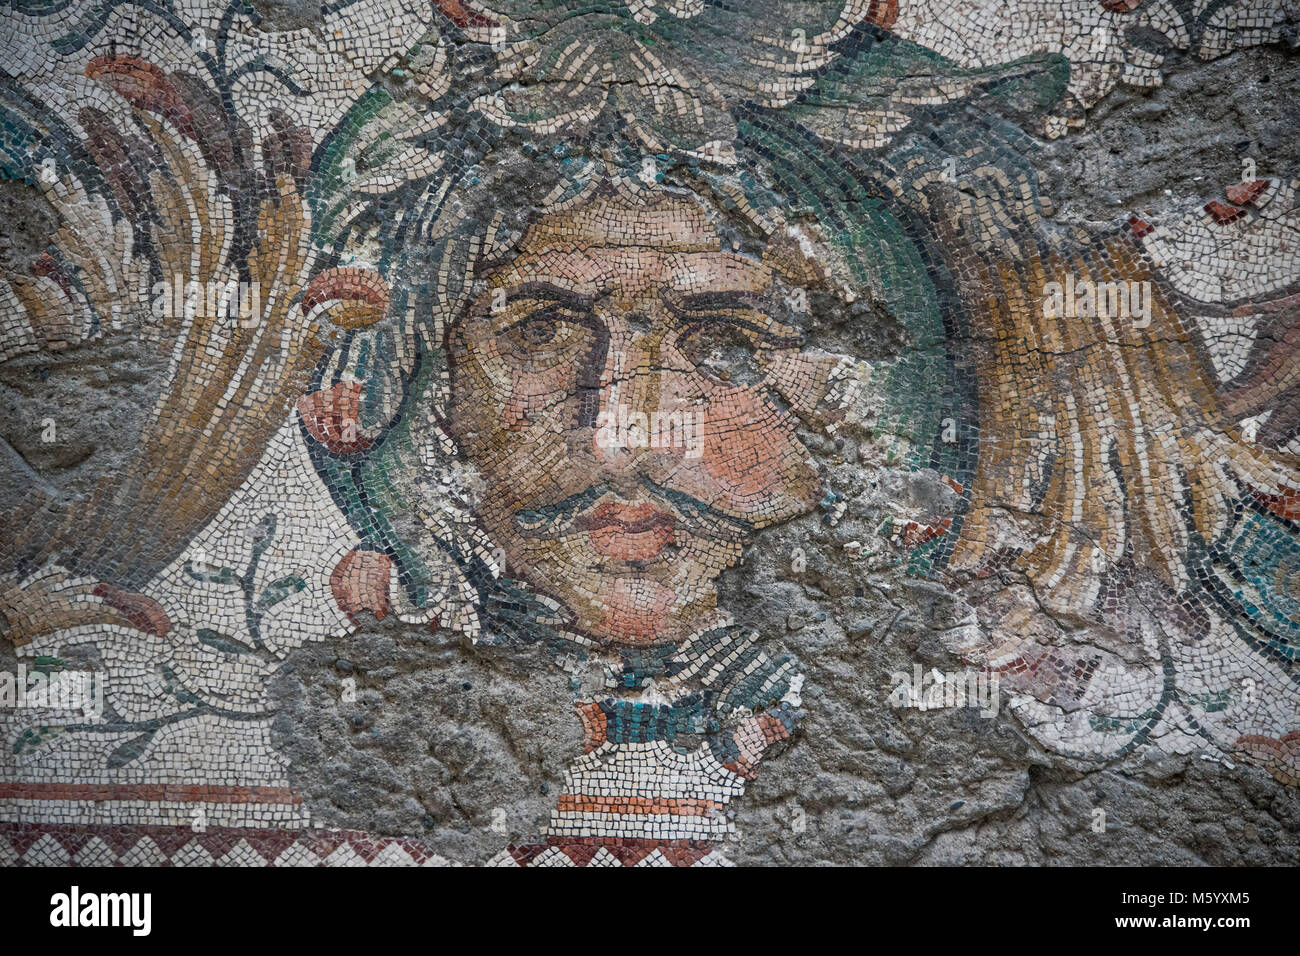 Great Palace Mosaic Museum - This small museum displays a 250 sq m fragment of mosaic pavement that was unearthed in the 1950s behind the Blue Mosque. There are excellent information panels that explain the mosaic floor's recovery and subsequent rescue. Stock Photo